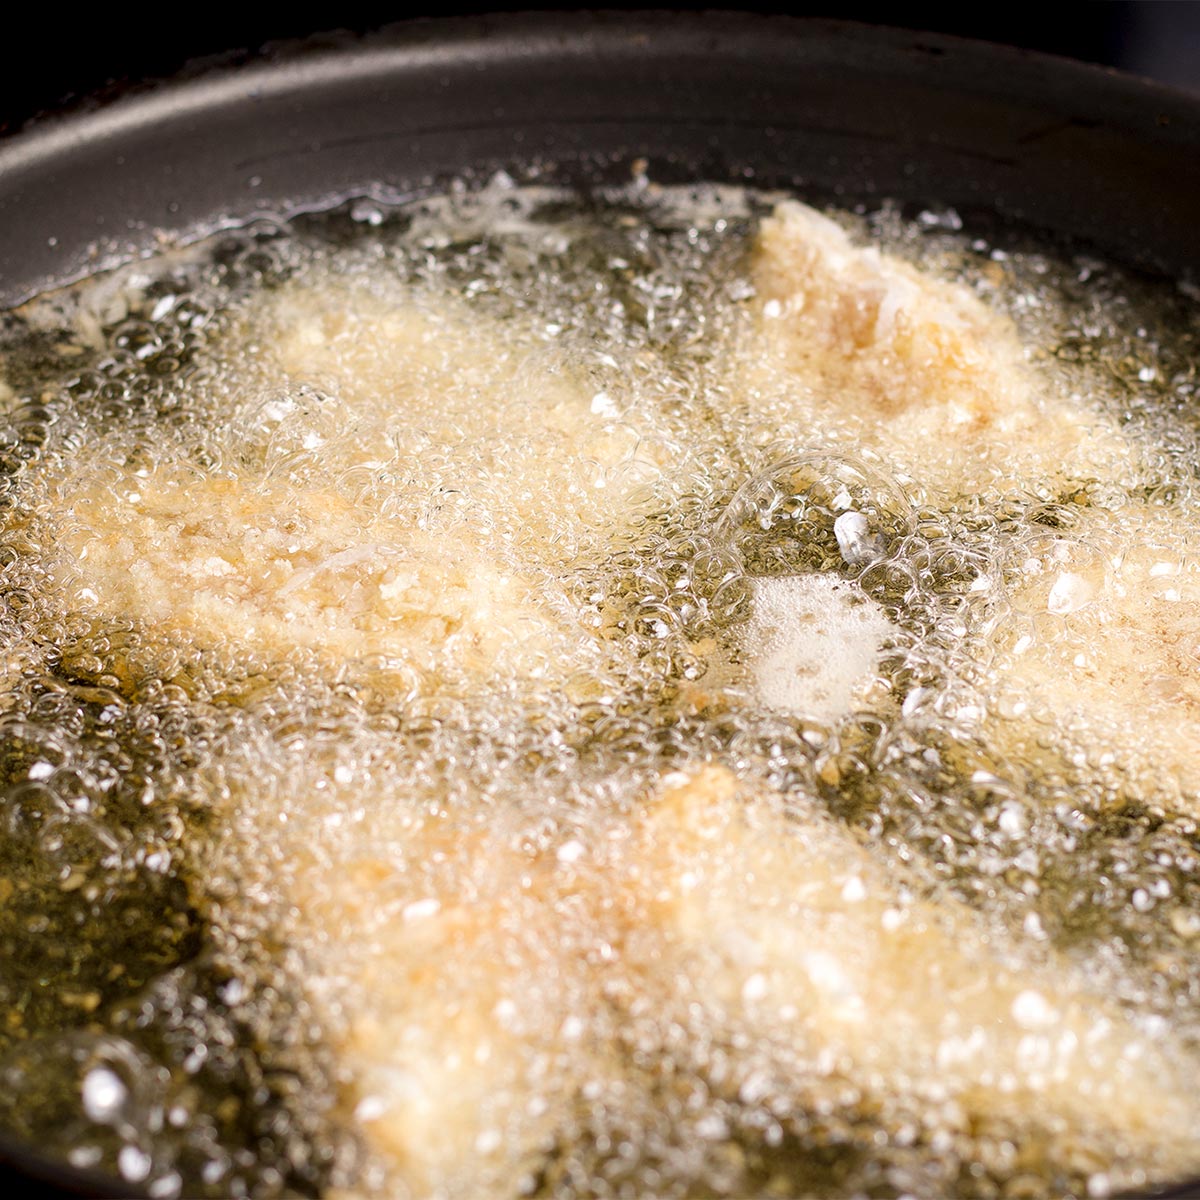 Pieces of coconut and panko breaded chicken frying in oil in a skillet set on a stovetop.